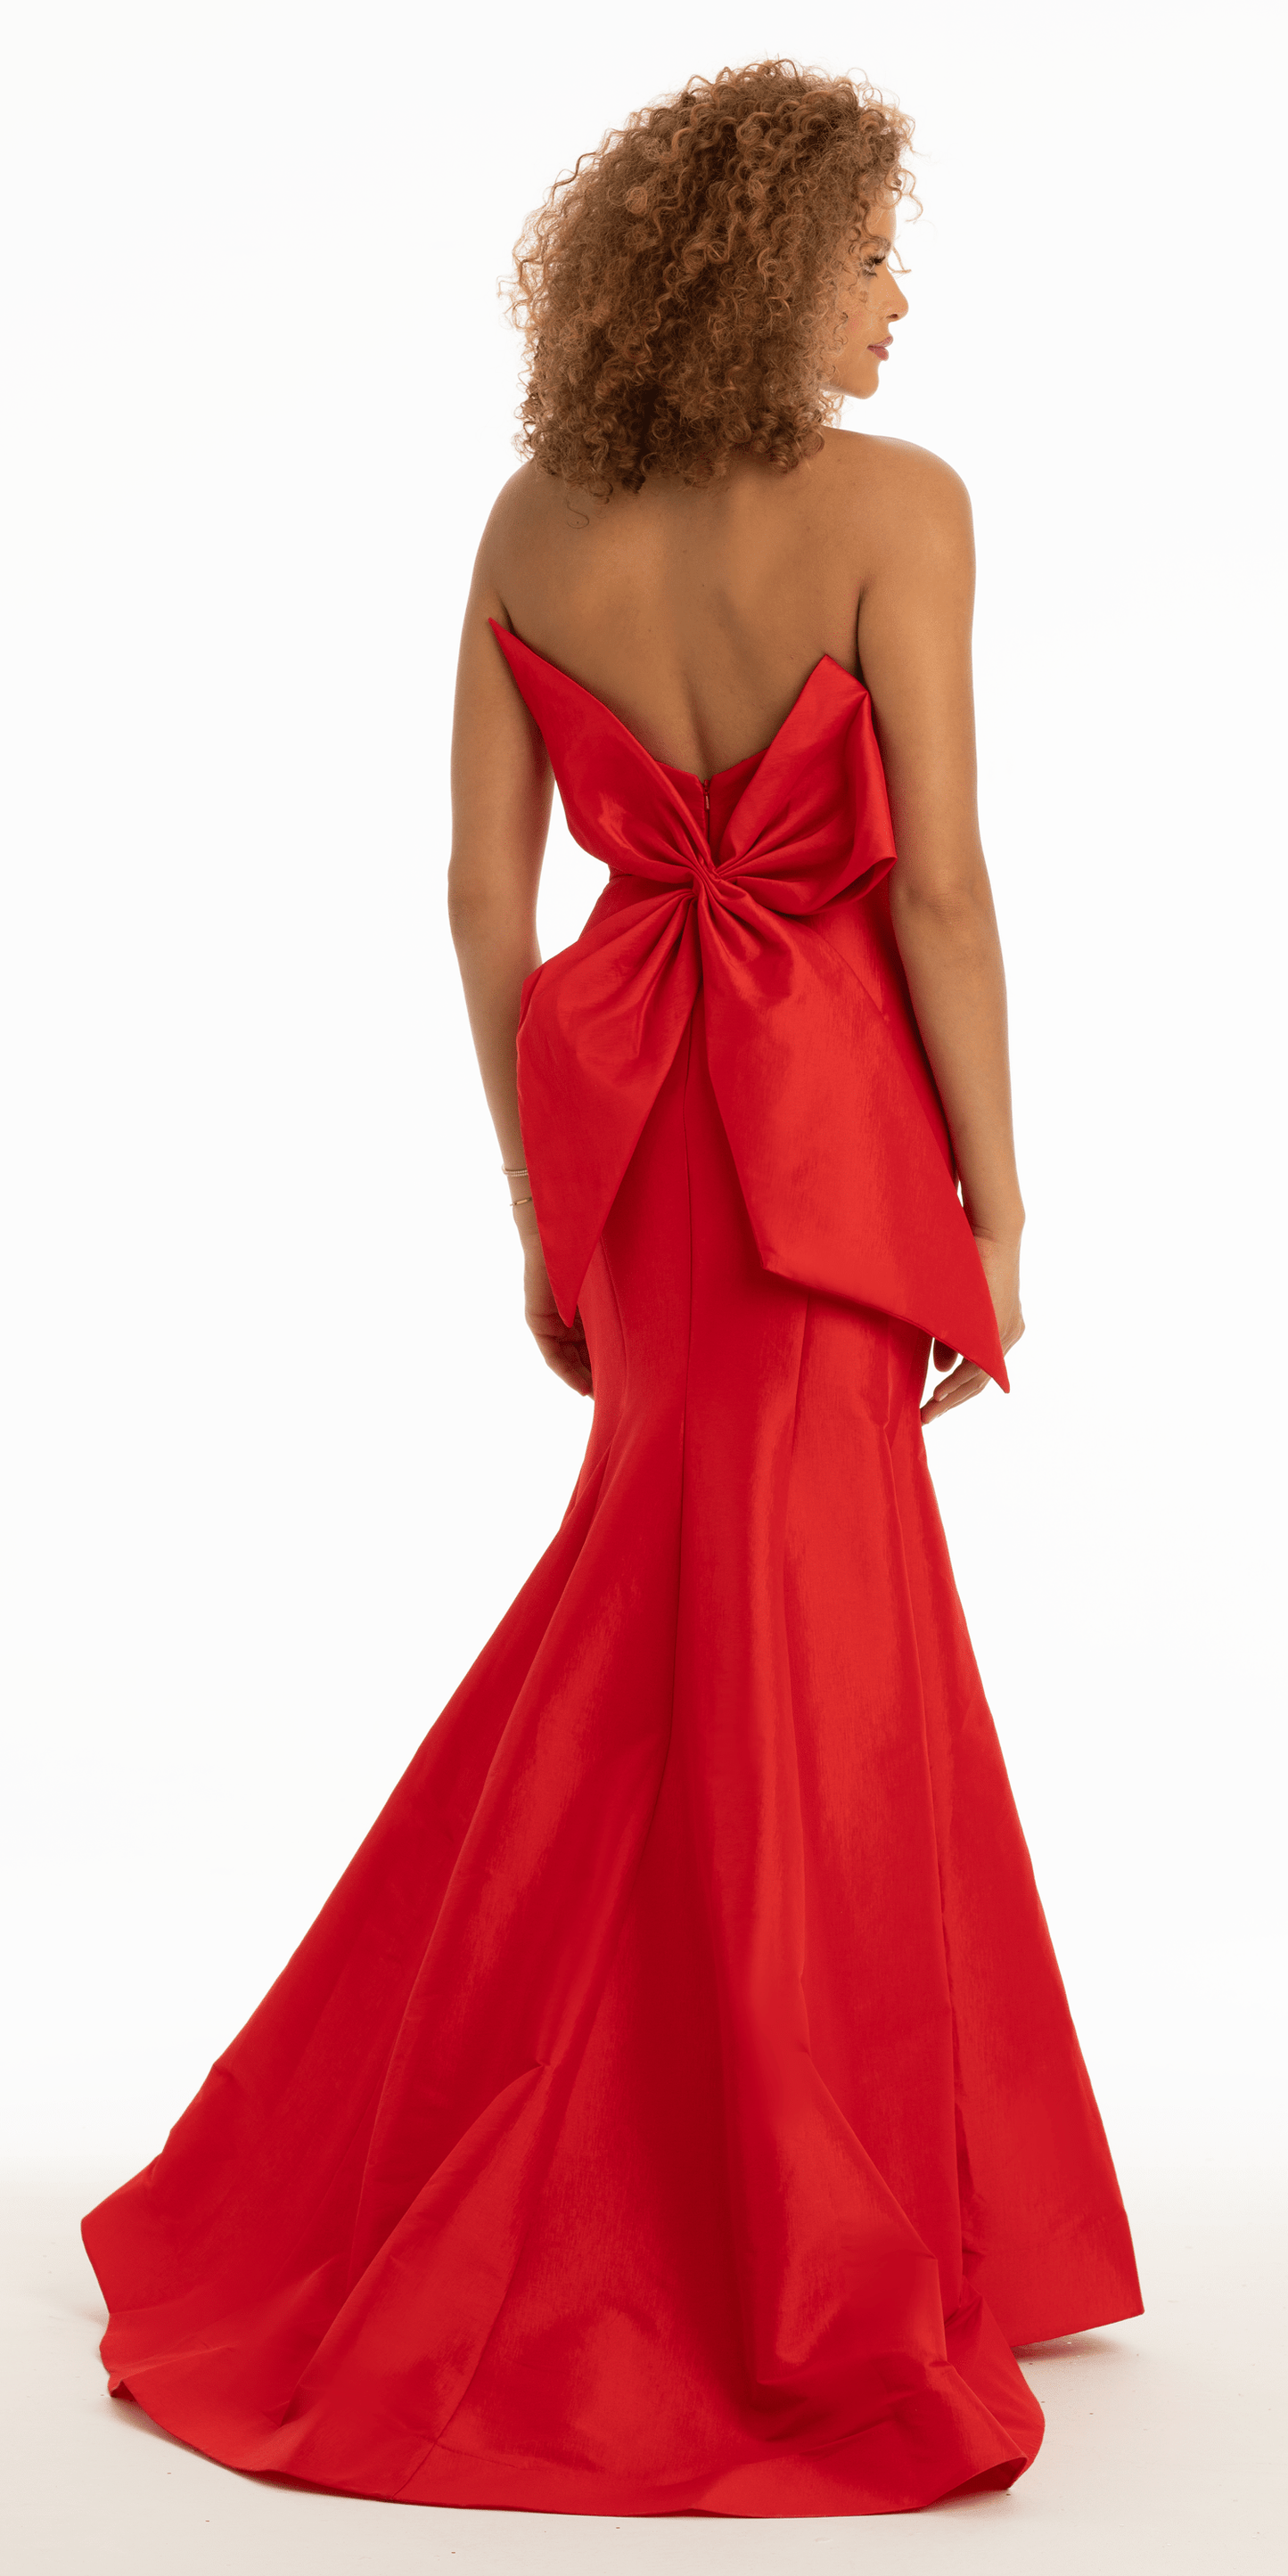 Camille La Vie Strapless Taffeta Mermaid Dress with Back Bow Detail missy / 02 / red